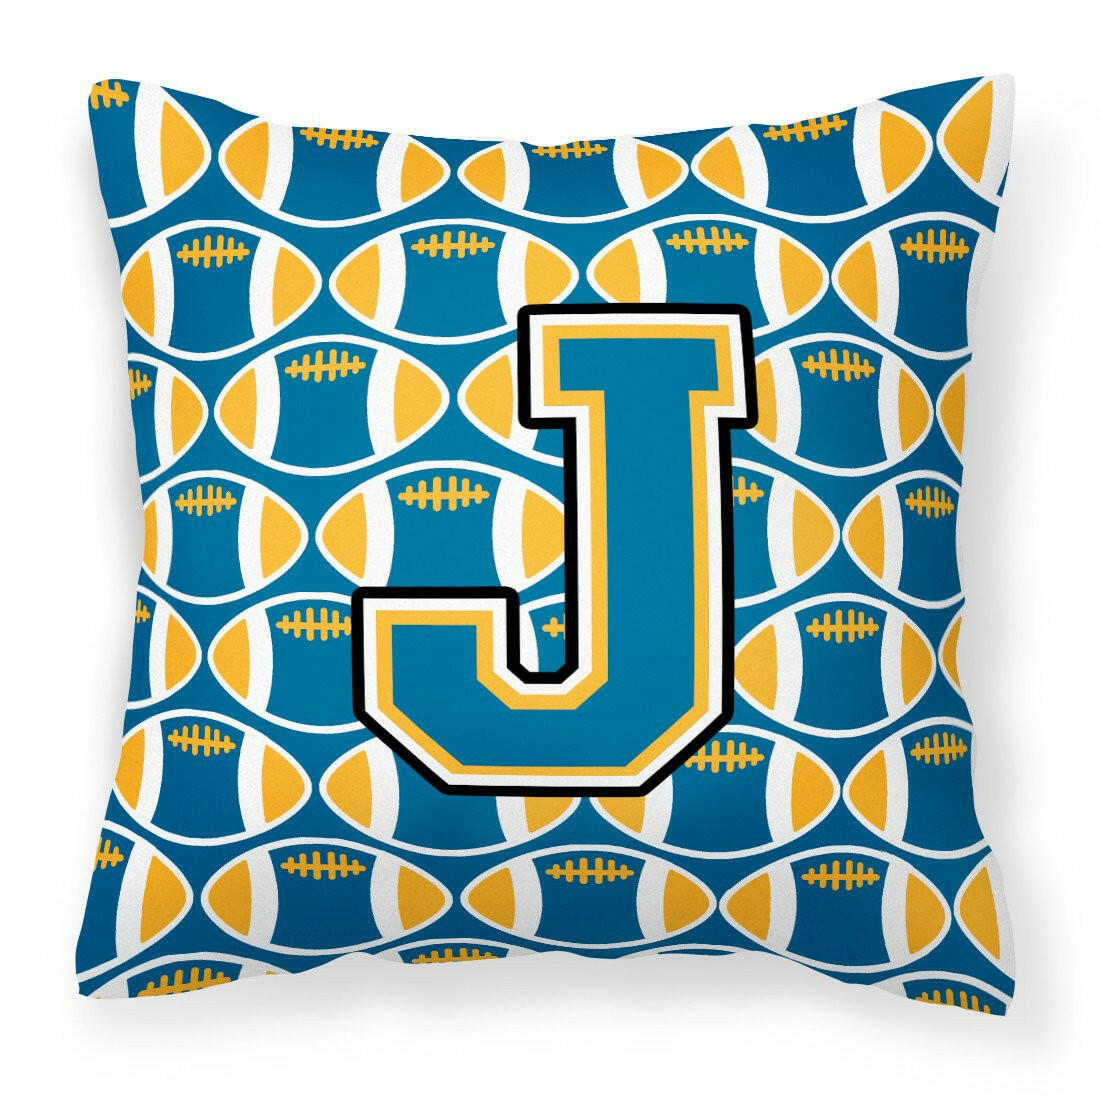 Letter J Football Blue and Gold Fabric Decorative Pillow CJ1077-JPW1414 by Caroline's Treasures